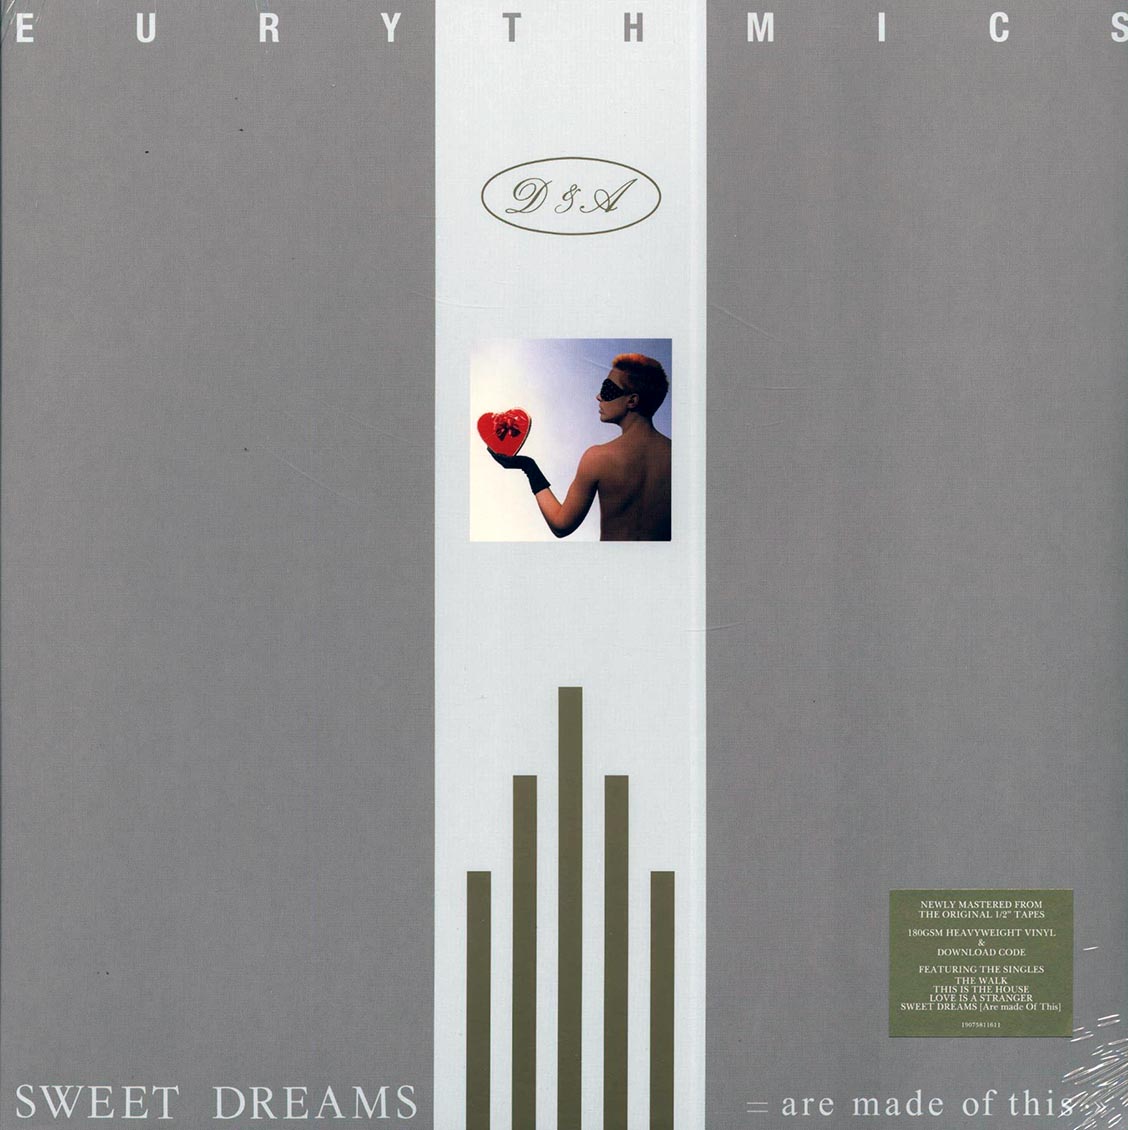 Eurythmics - Sweet Dreams Are Made Of These (incl. mp3) (180g) - Vinyl LP